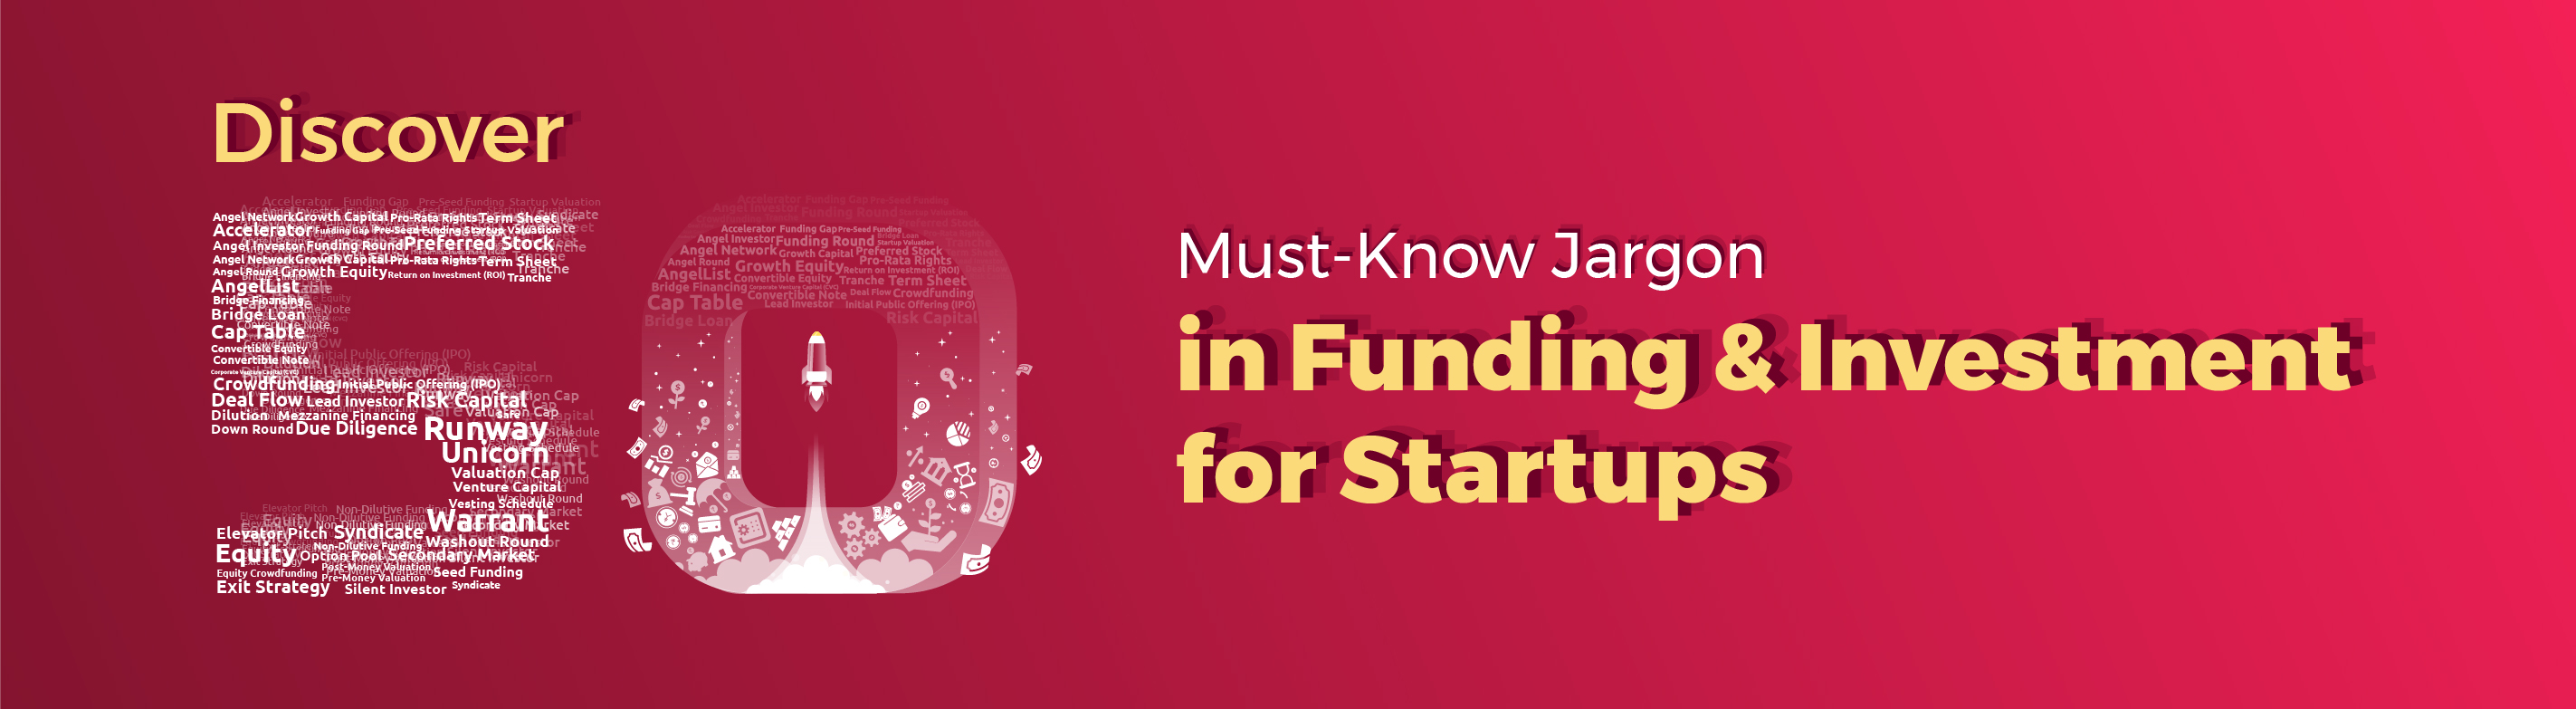 Startup terms in investment & funding blog